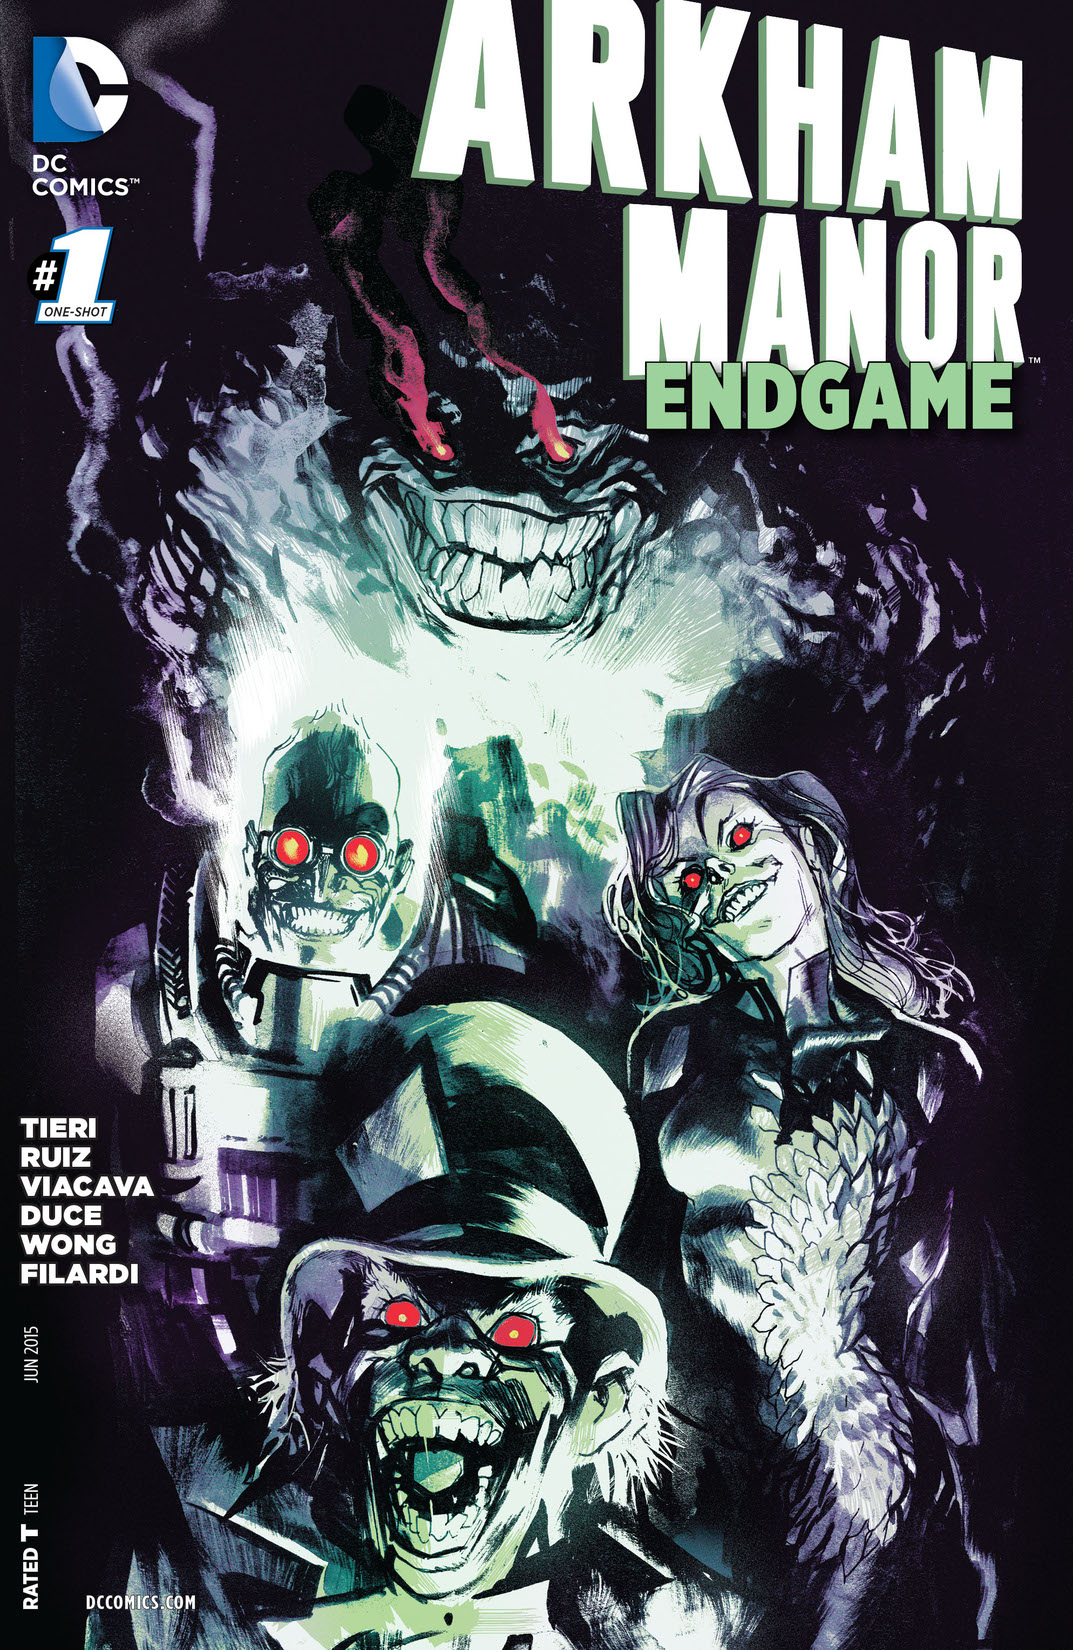 Arkham Manor: Endgame #1 preview images